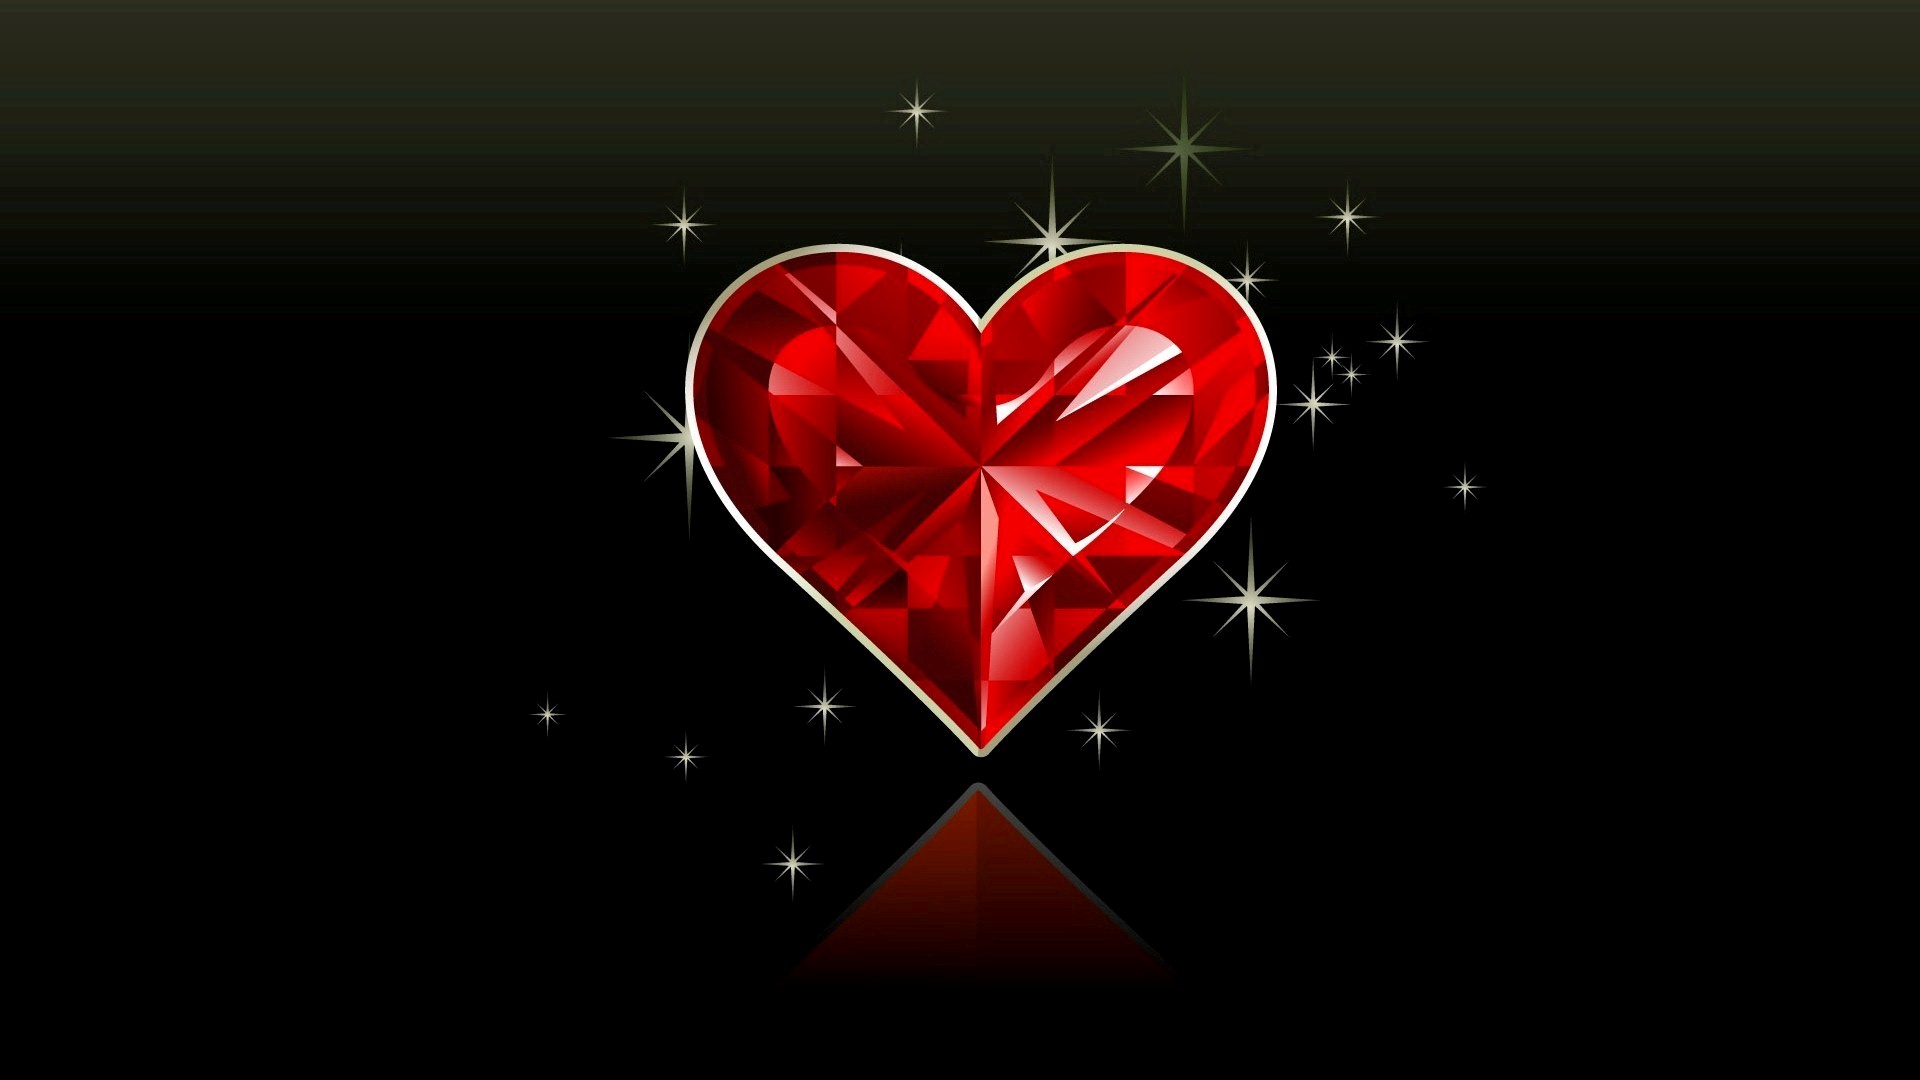 Red Crystal Heart in Black Background HD Wallpapers 1920x1080